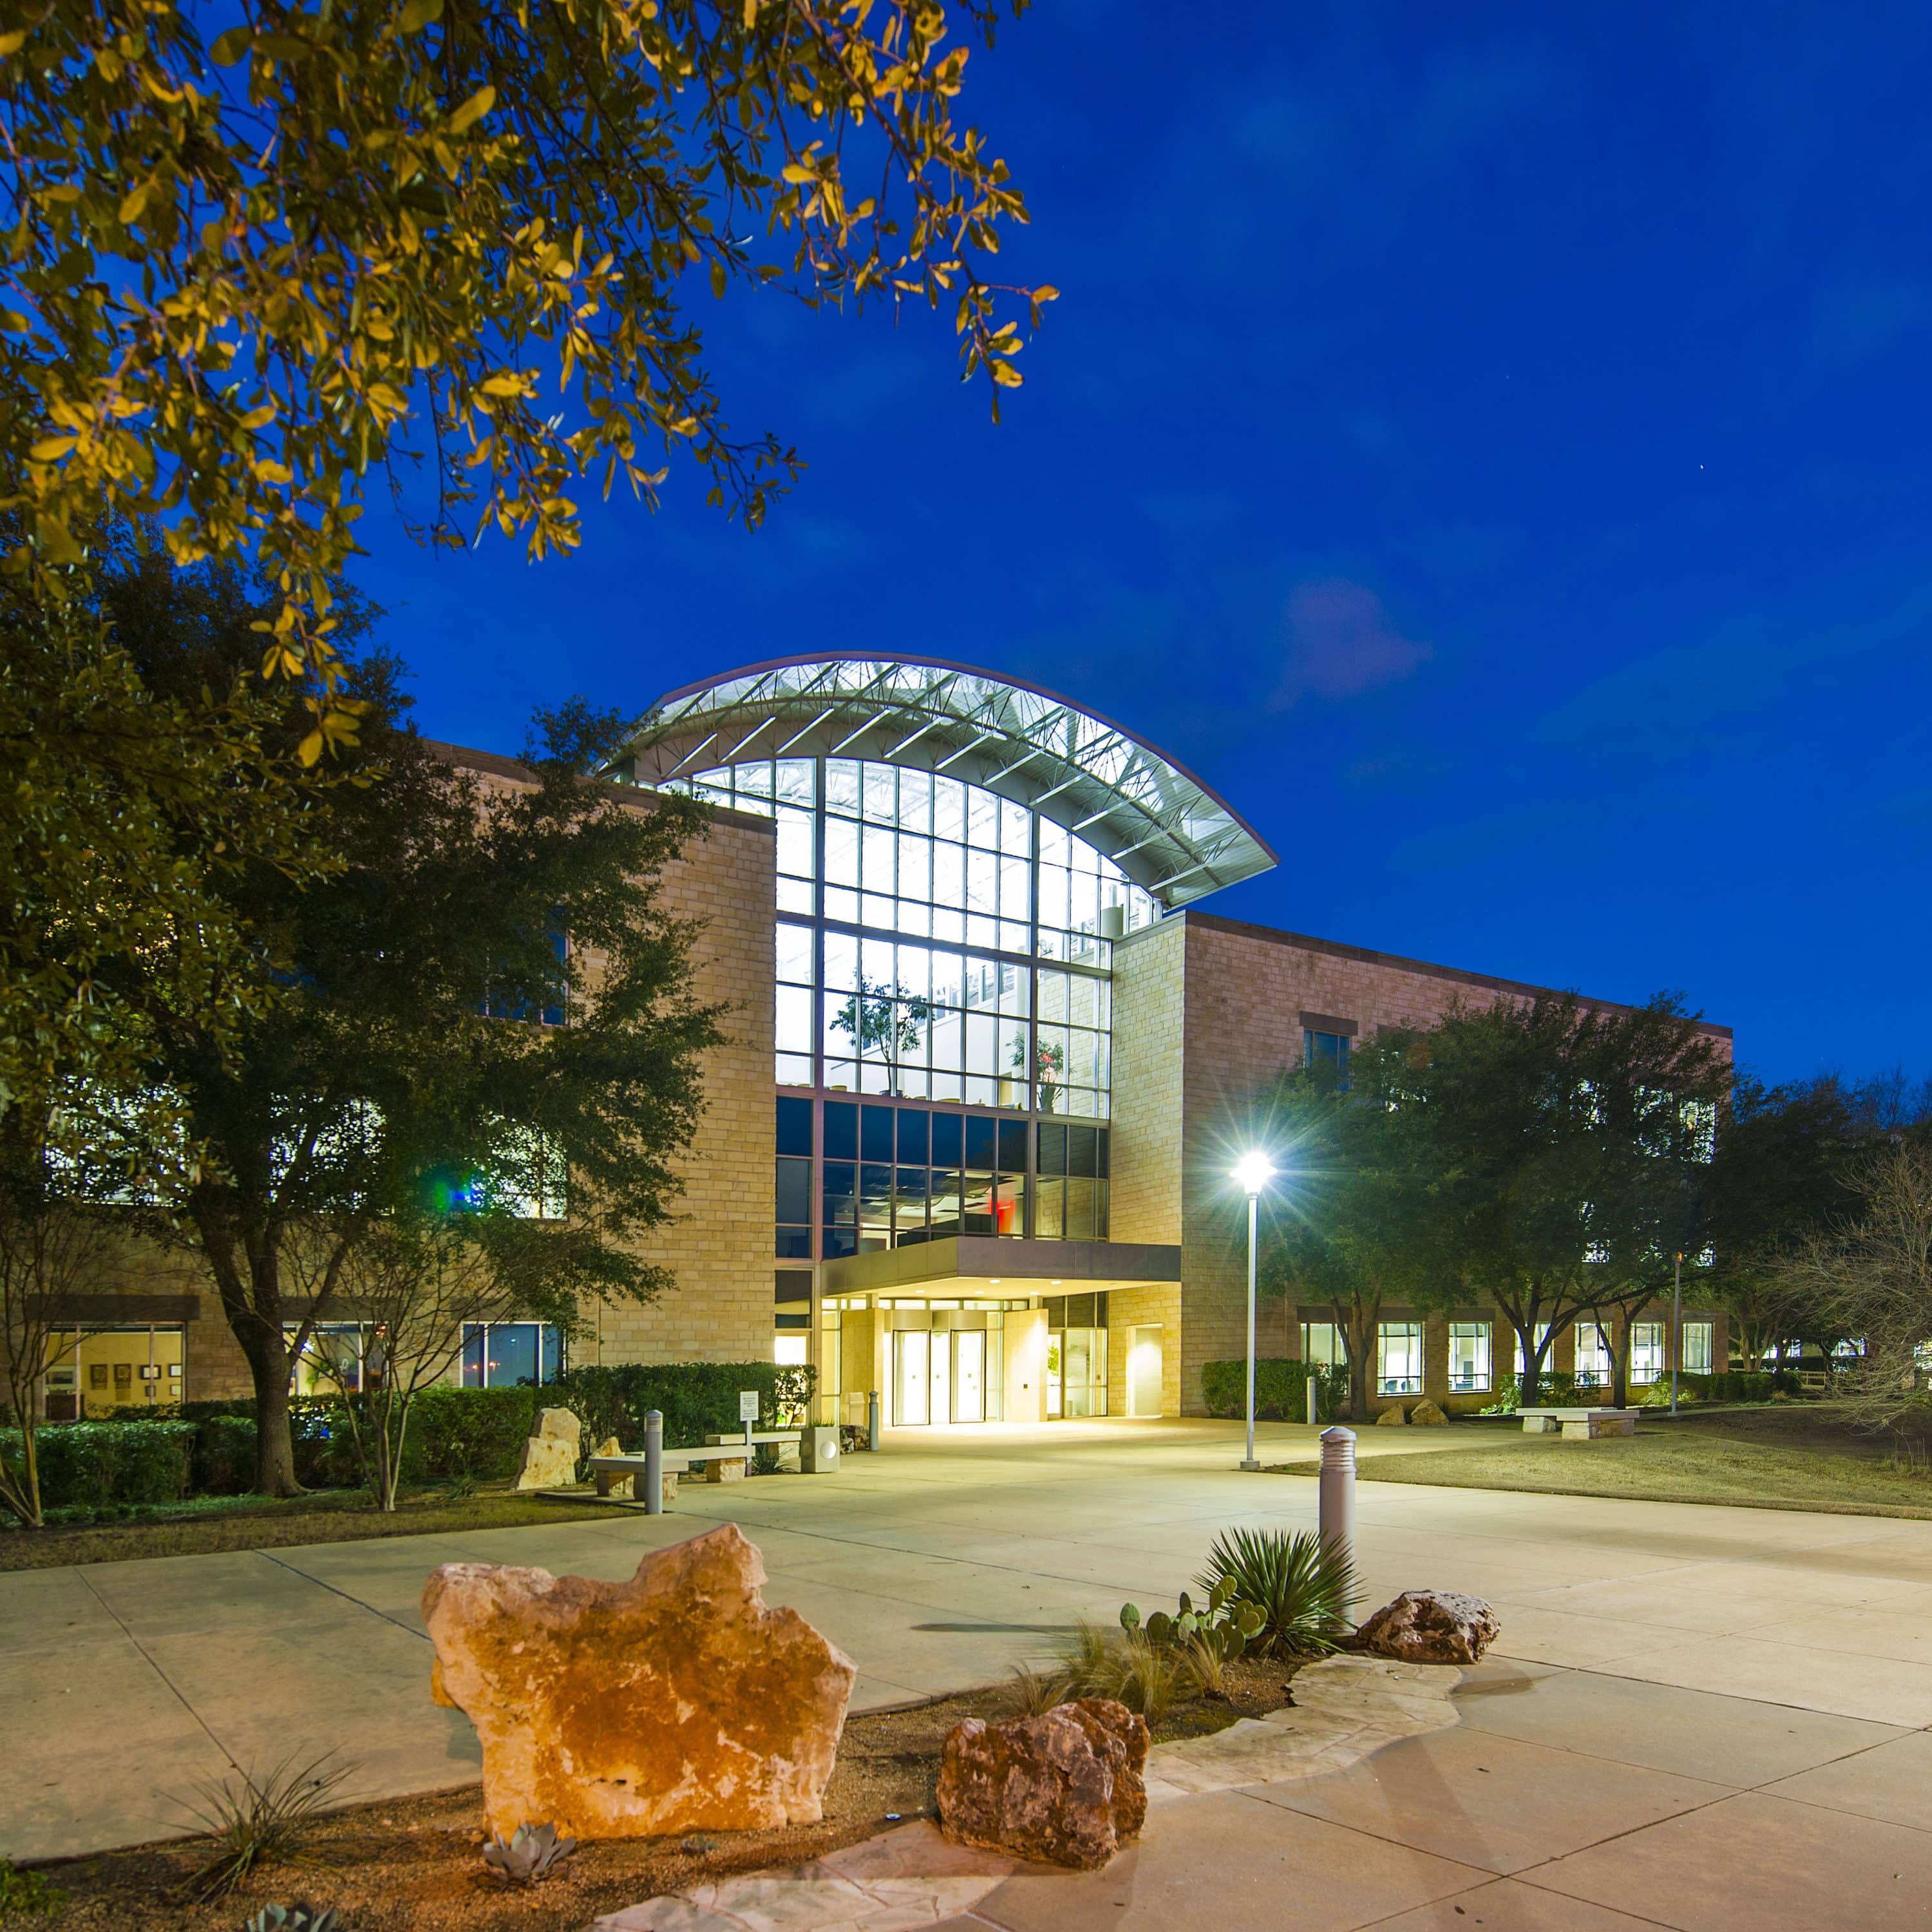 7700 Parmer Office Campus in Austin, Texas